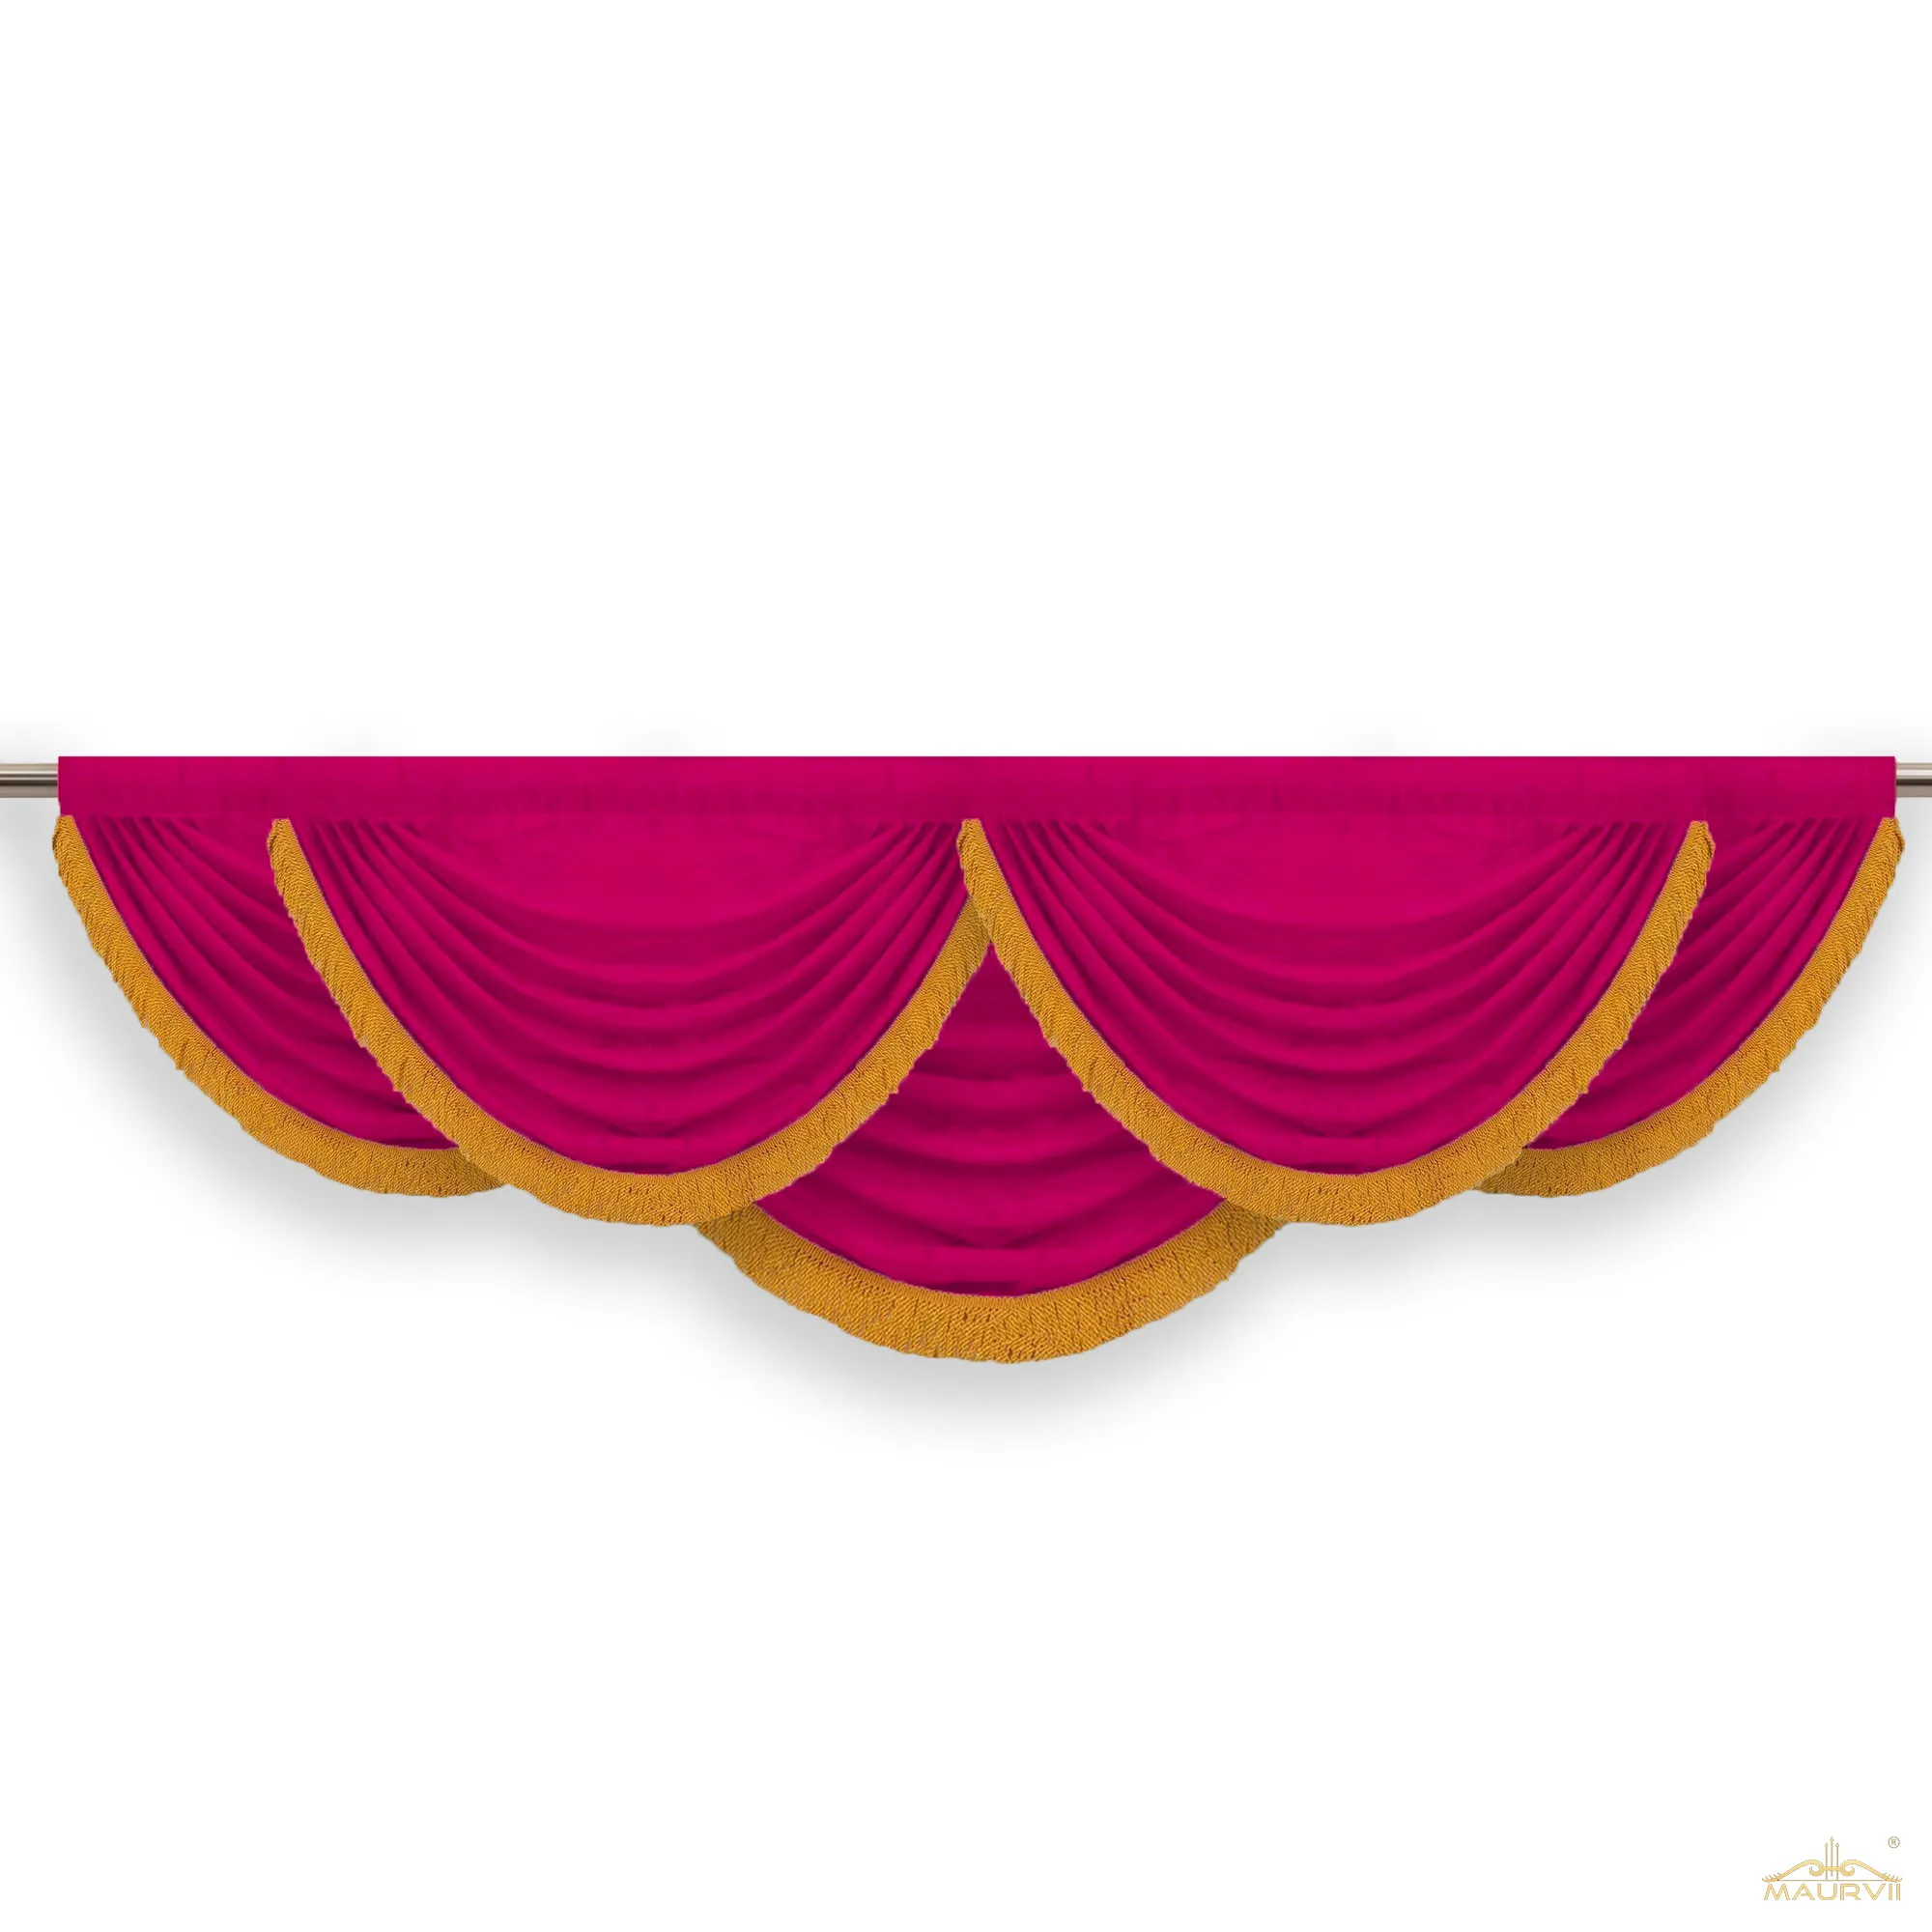 curtains with attached valance